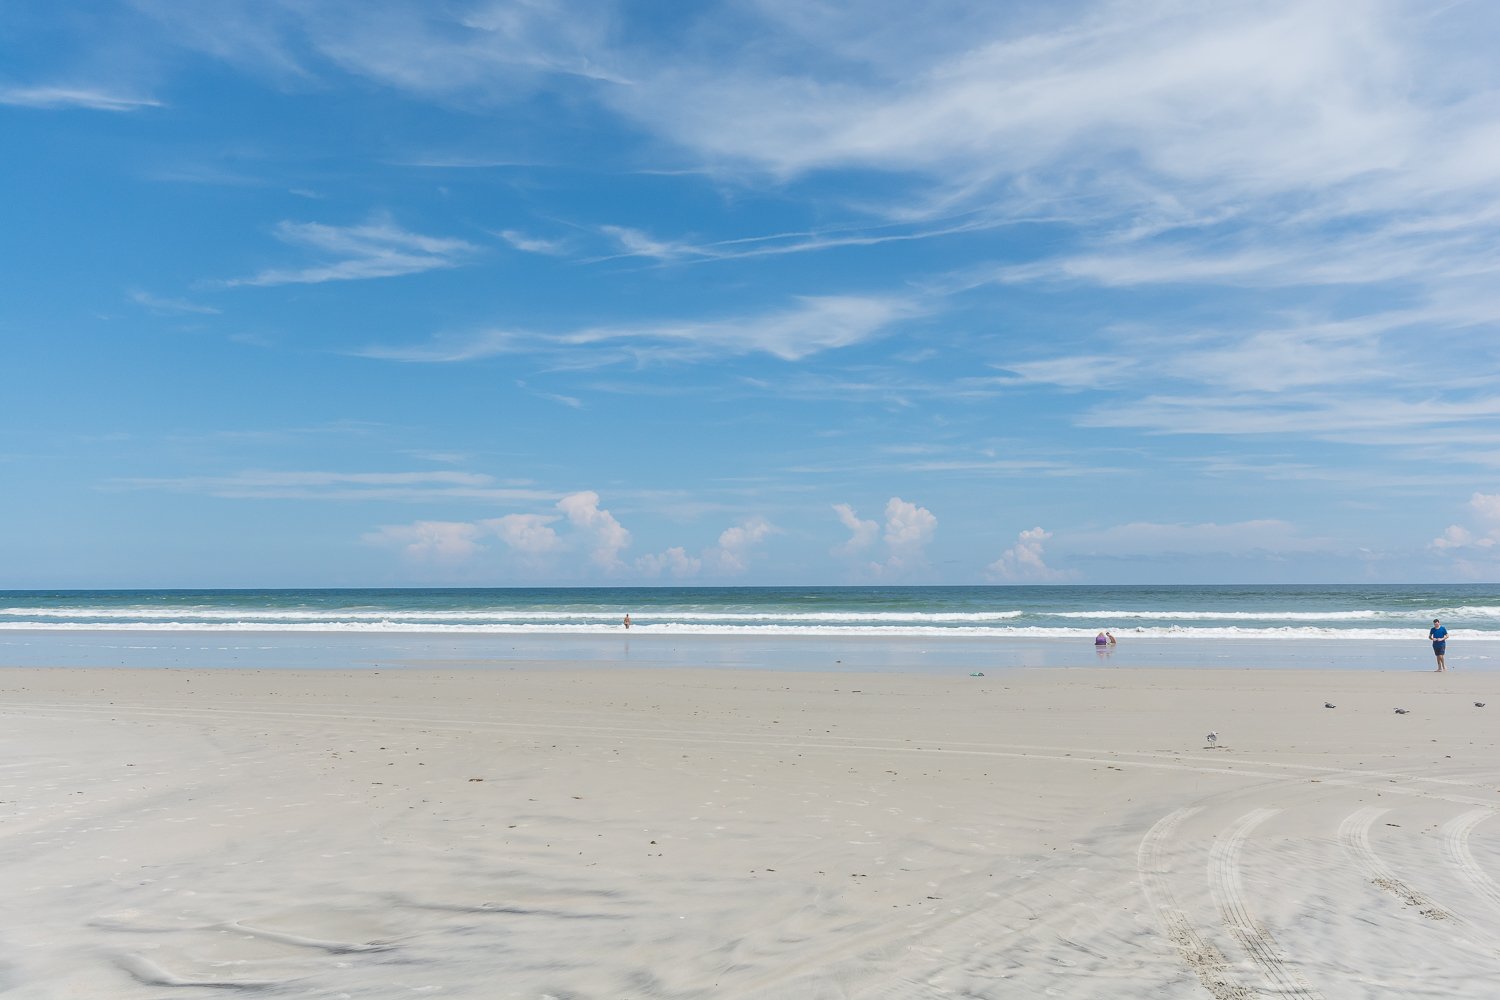 Beautiful New Smyrna Beach. Car free area. Just a short walk from the house.